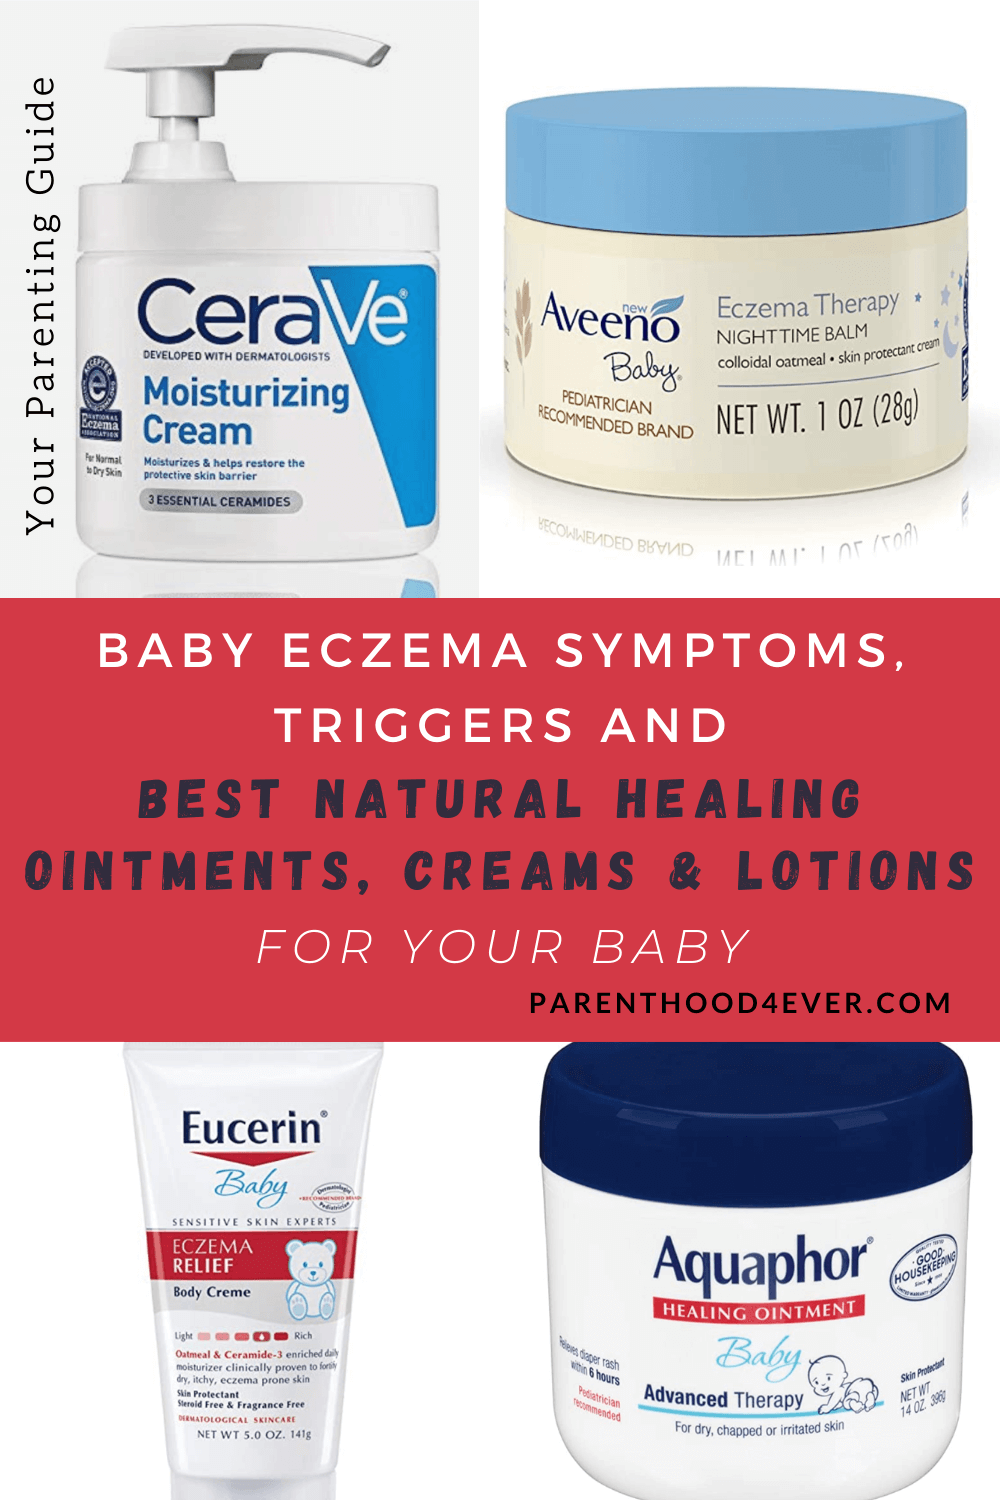 Bath Stuff For Baby Eczema / grahams natural grahams natural | Baby Eczema Body And ... : To help ease the irritation of baby's skin condition, consider switching the shampoo and body wash you're using during bath time.